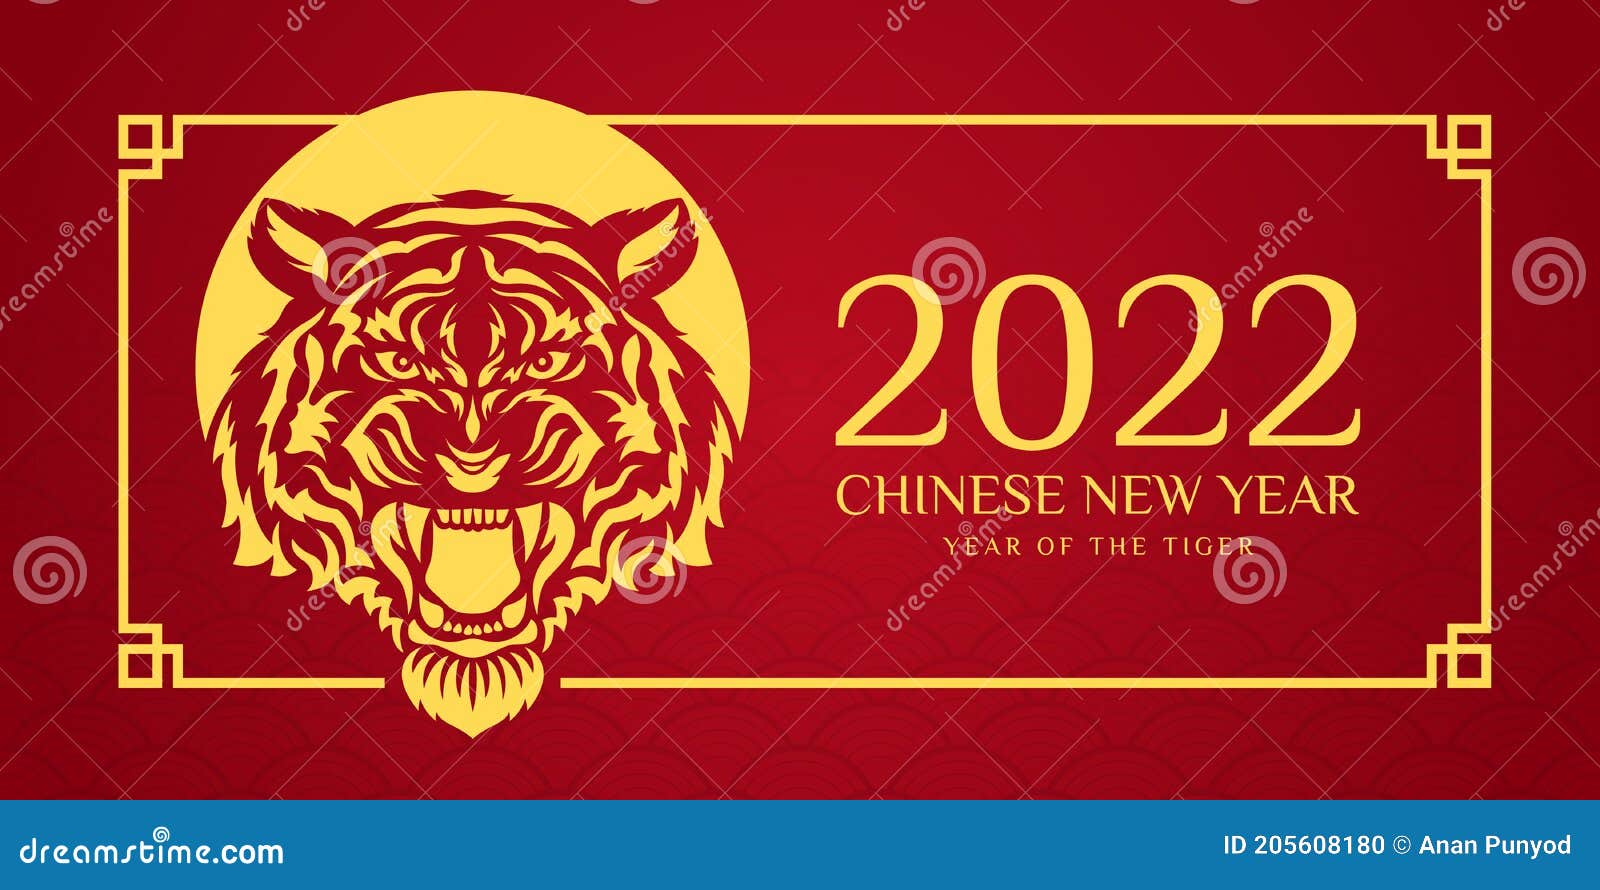 Chinese New Year 2022 Year Of The Tiger With Gold Head Roaring Tiger Zodiac Sign In China Frame On Red China Texture Background Stock Vector Illustration Of Modern Ferocious 205608180